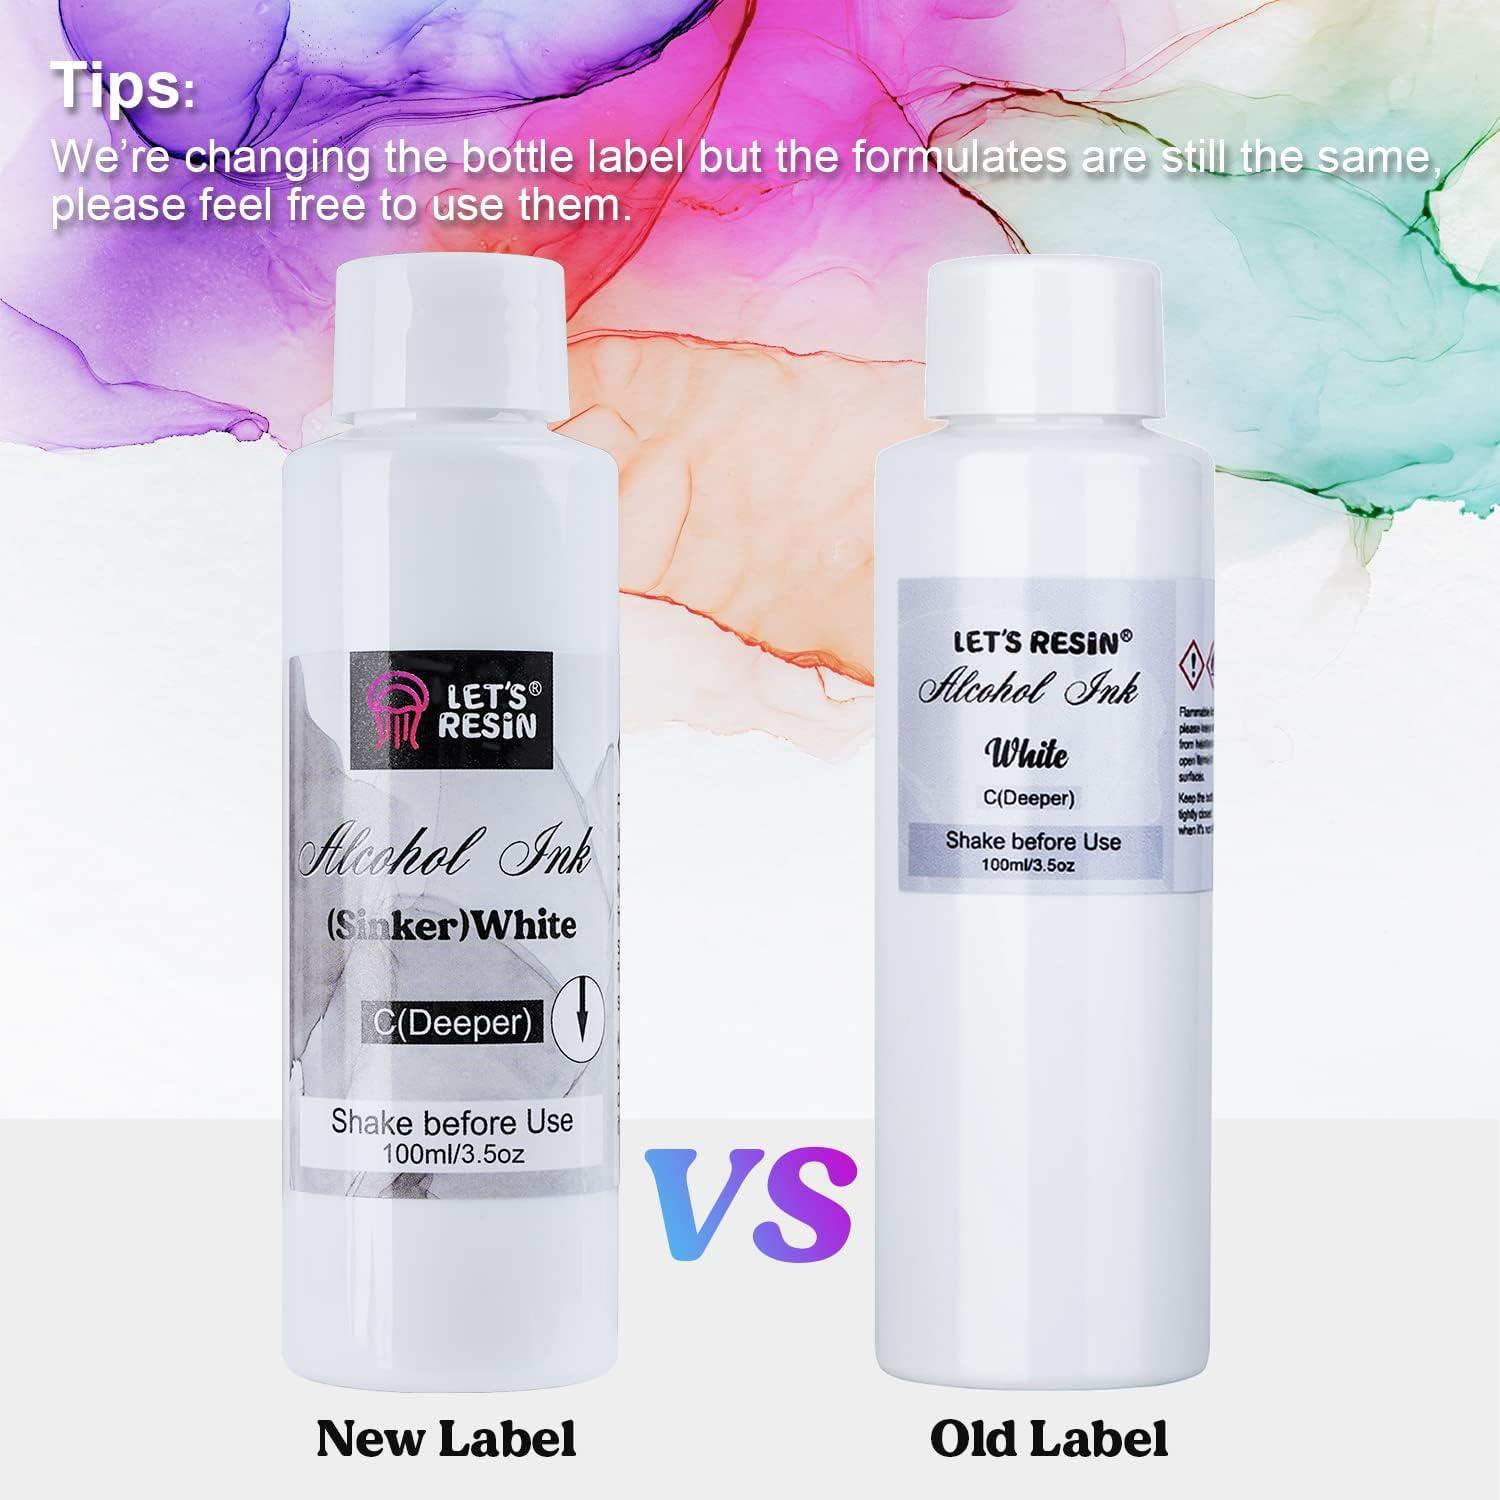 LET'S RESIN White Alcohol Ink for Resin, Alcohol Ink White Colors,2 Bottles  Each 3.5oz,Adjustable Alcohol-Based Resin Ink,White Resin Pigment for